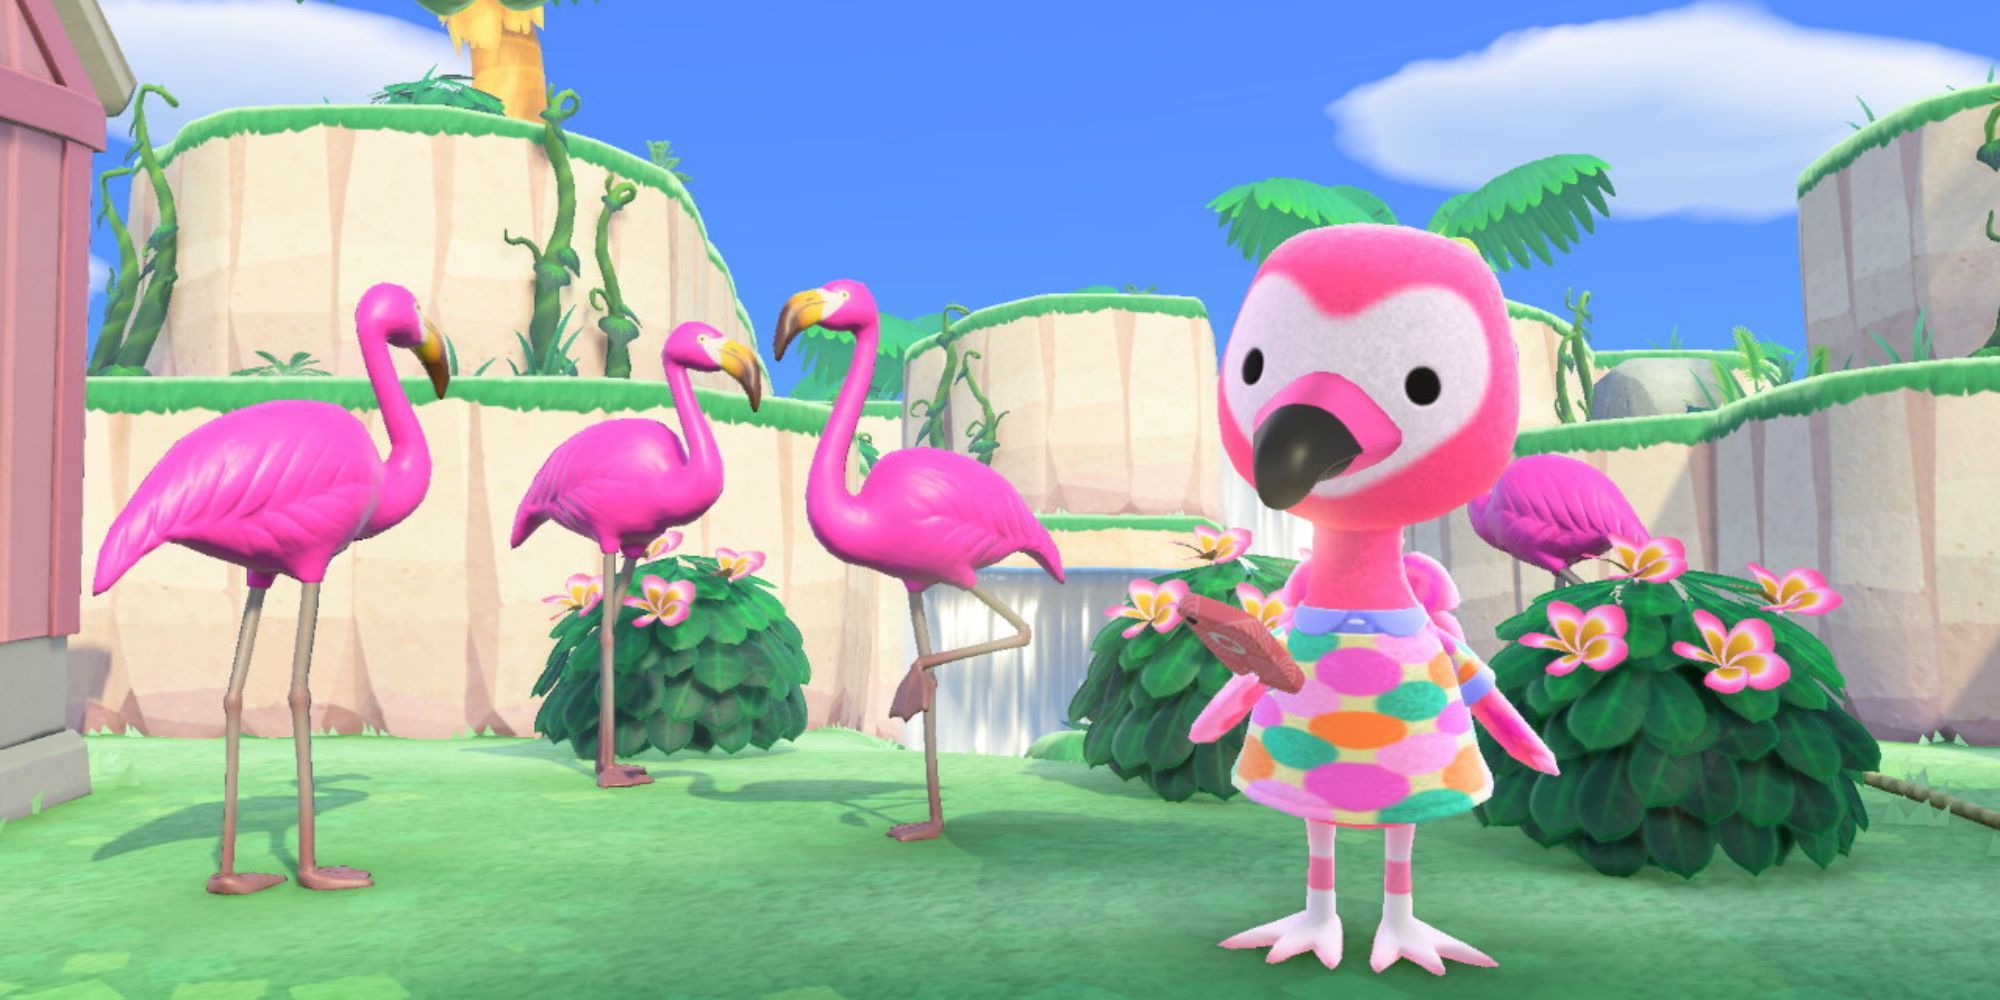 Flora looks at her phone outside while surrounded by plastic flamingos